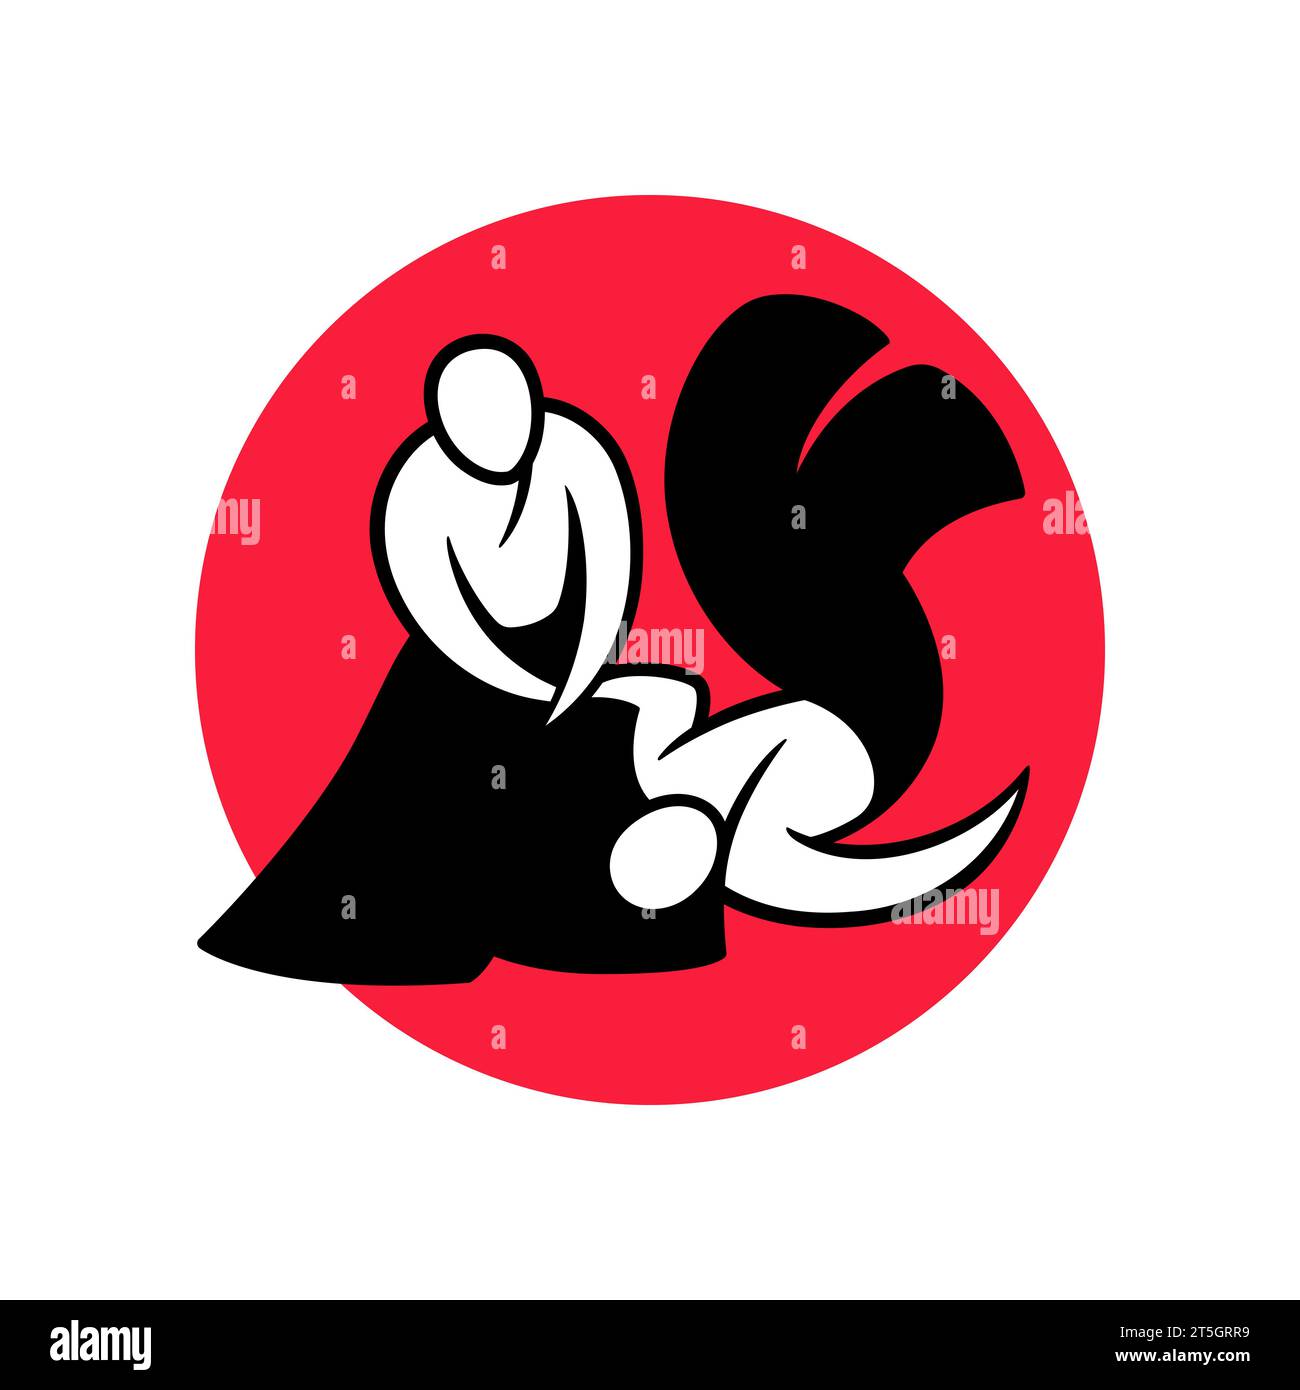 Aikido black and white minimal logo on red circle. Simple drawing of Japanese martial art. Vector illustration. Stock Vector